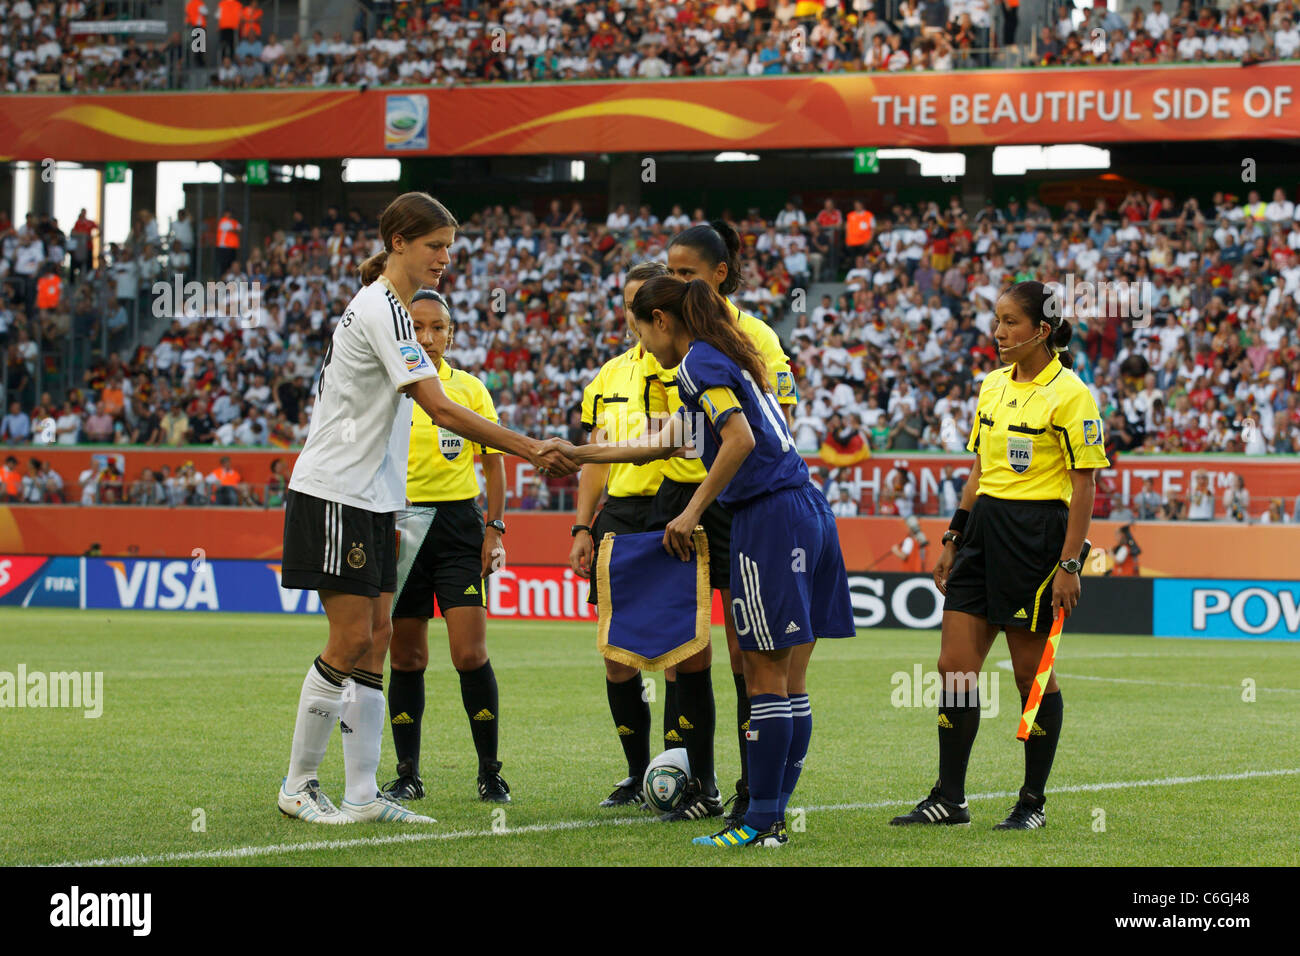 Captains Kerstin Garefrekes of Germany (l) and Homare Sawa of Japan (r) shake hands before a 2011 World Cup quarterfinal match. Stock Photo